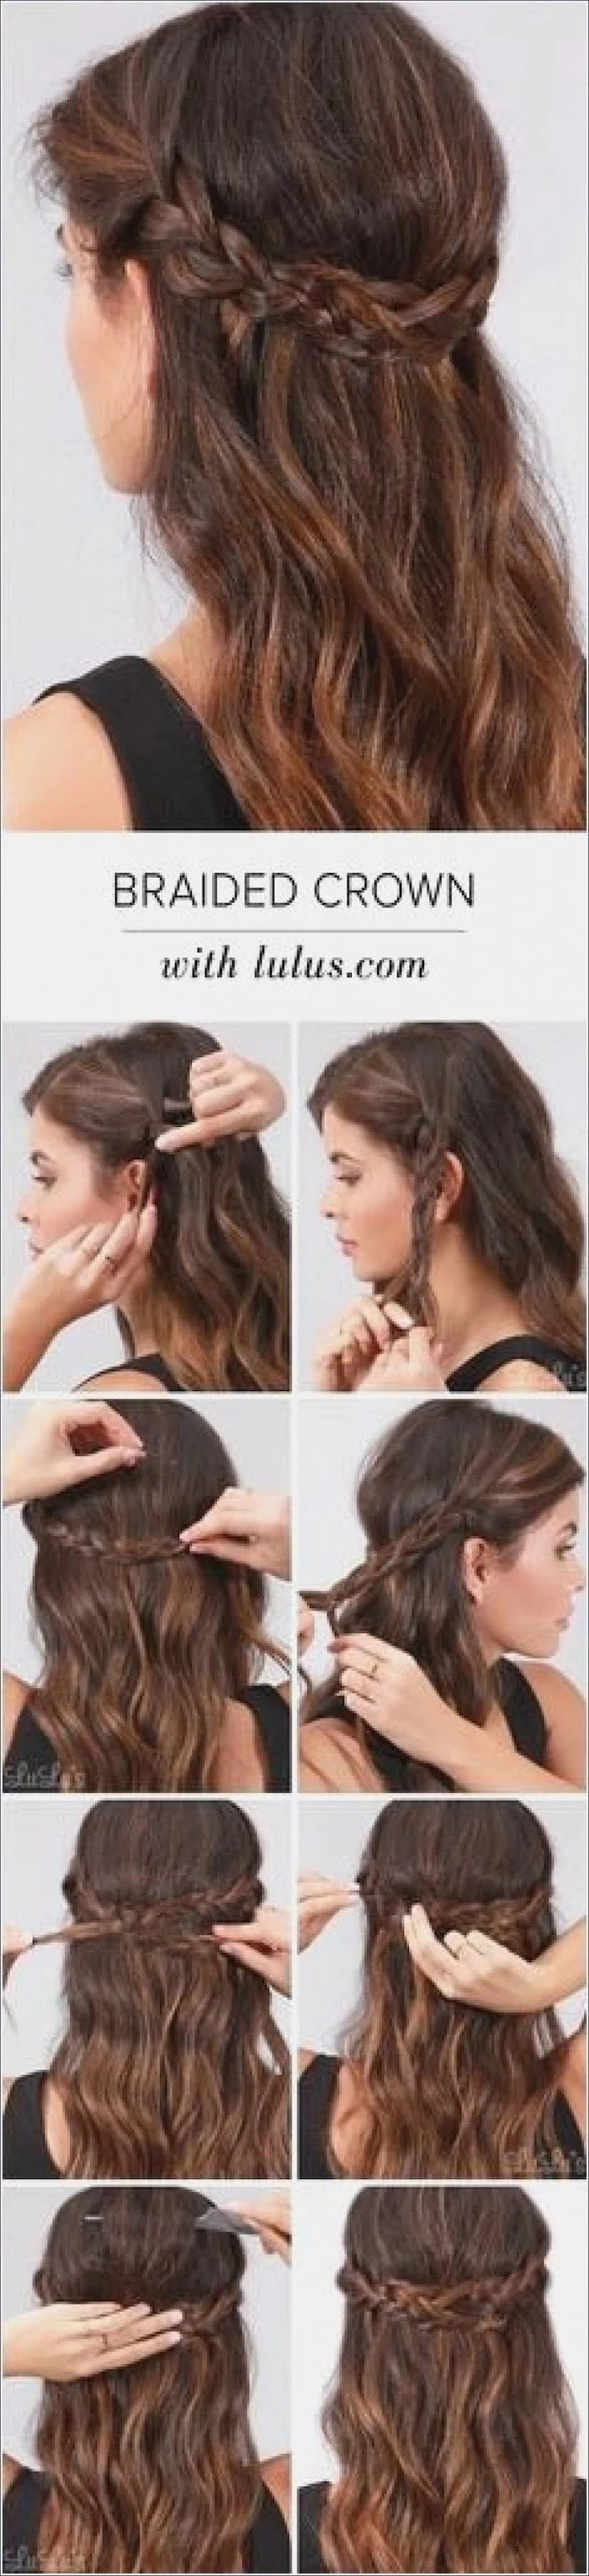 cute and simple hairstyles for school unique hairstyles curly school girl hairstyle creative best cute printables